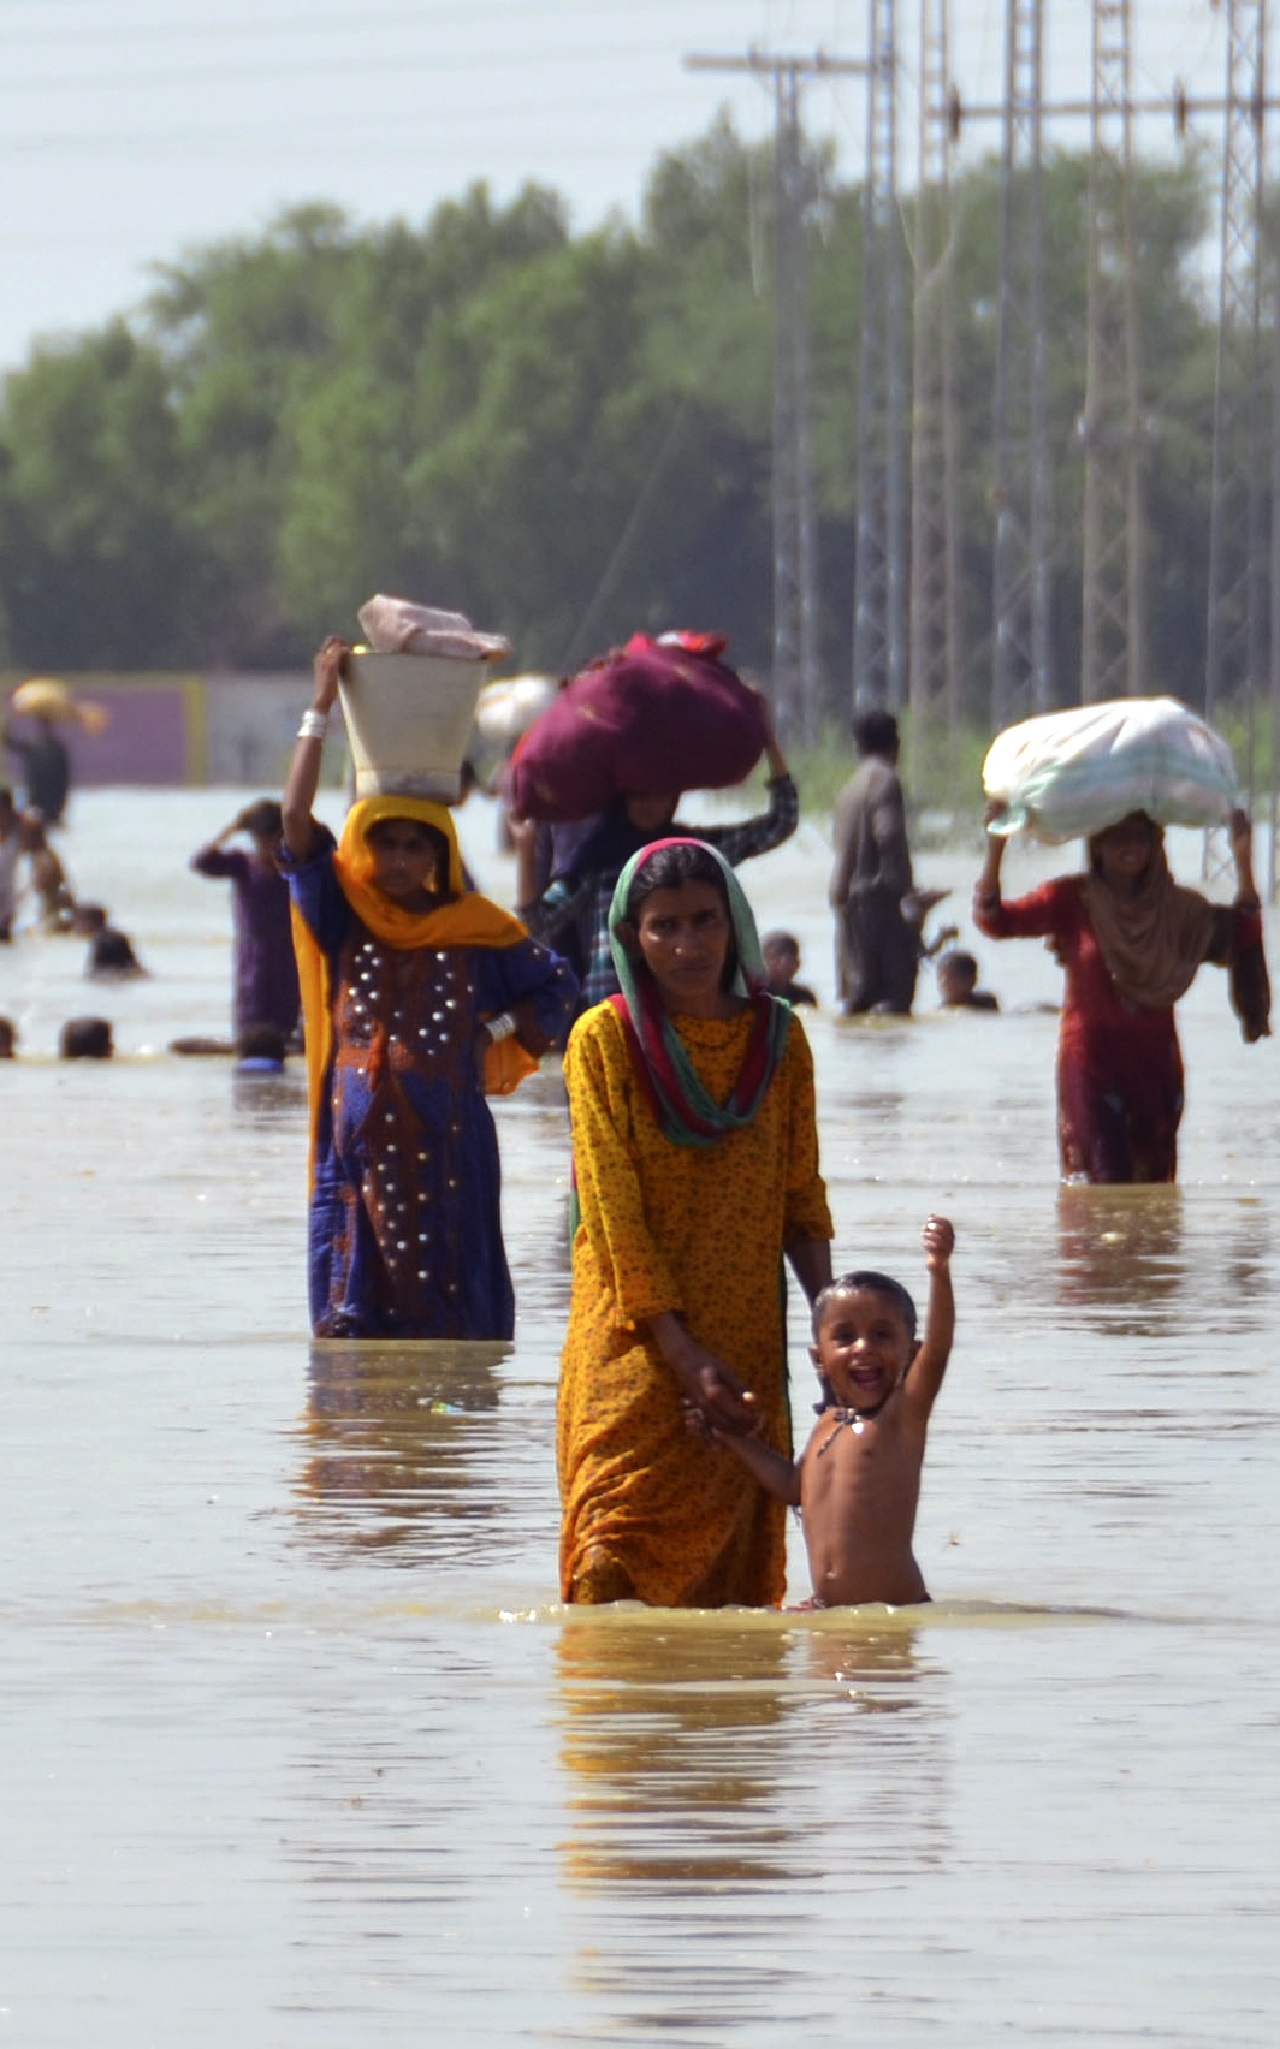 Pakistan sees a 'climate catastrophe', over 1,000 dead due to floods